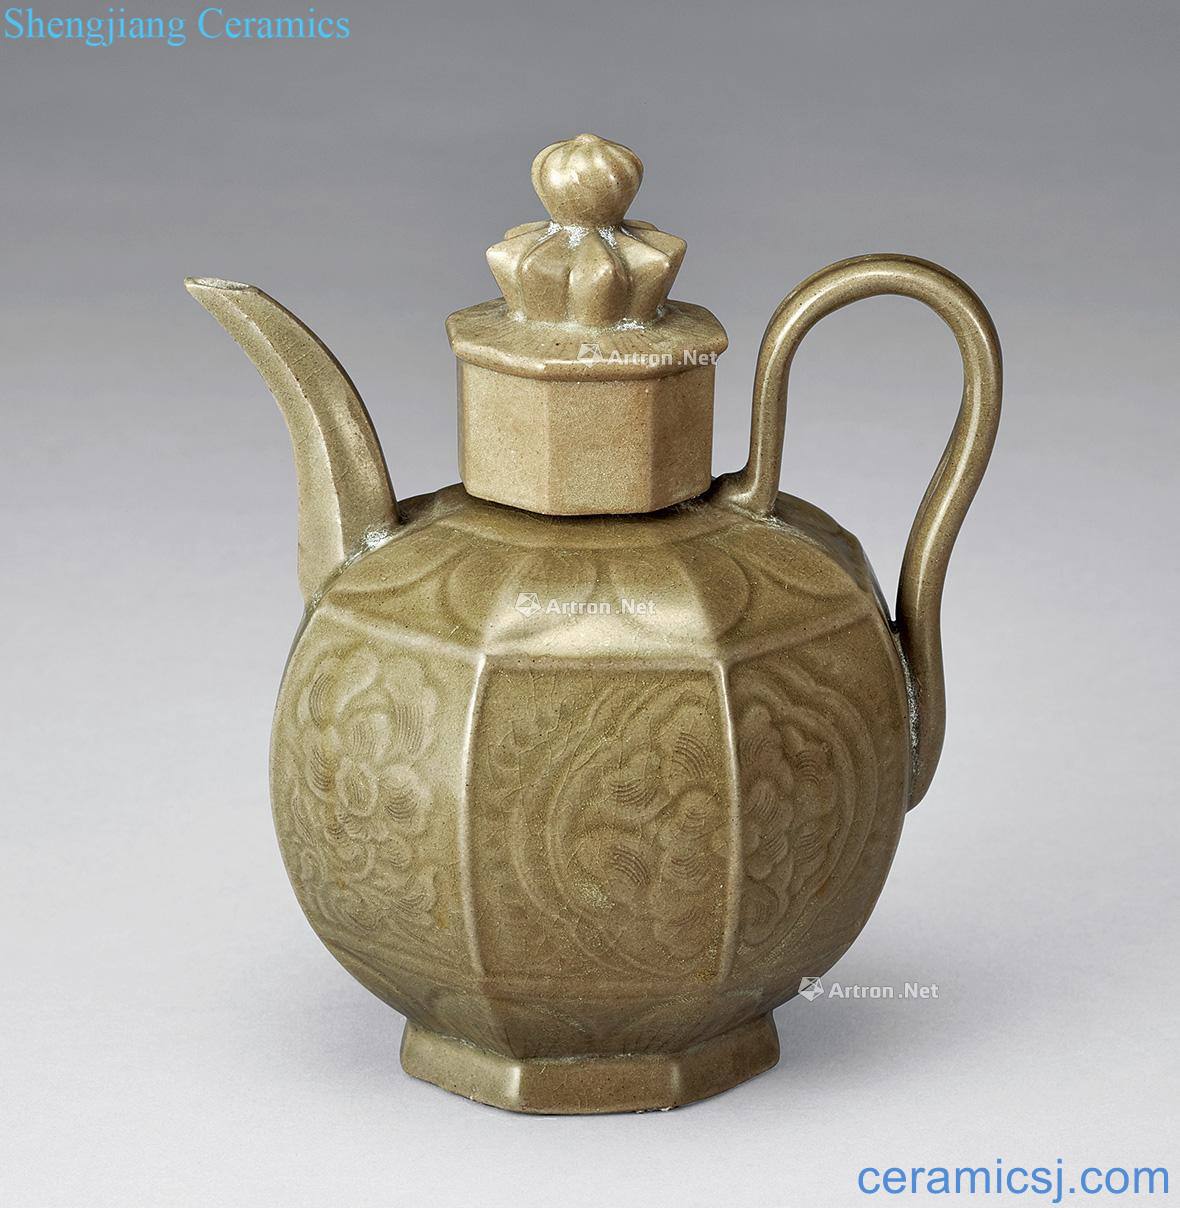 The southern song dynasty celadon petals grain ewer